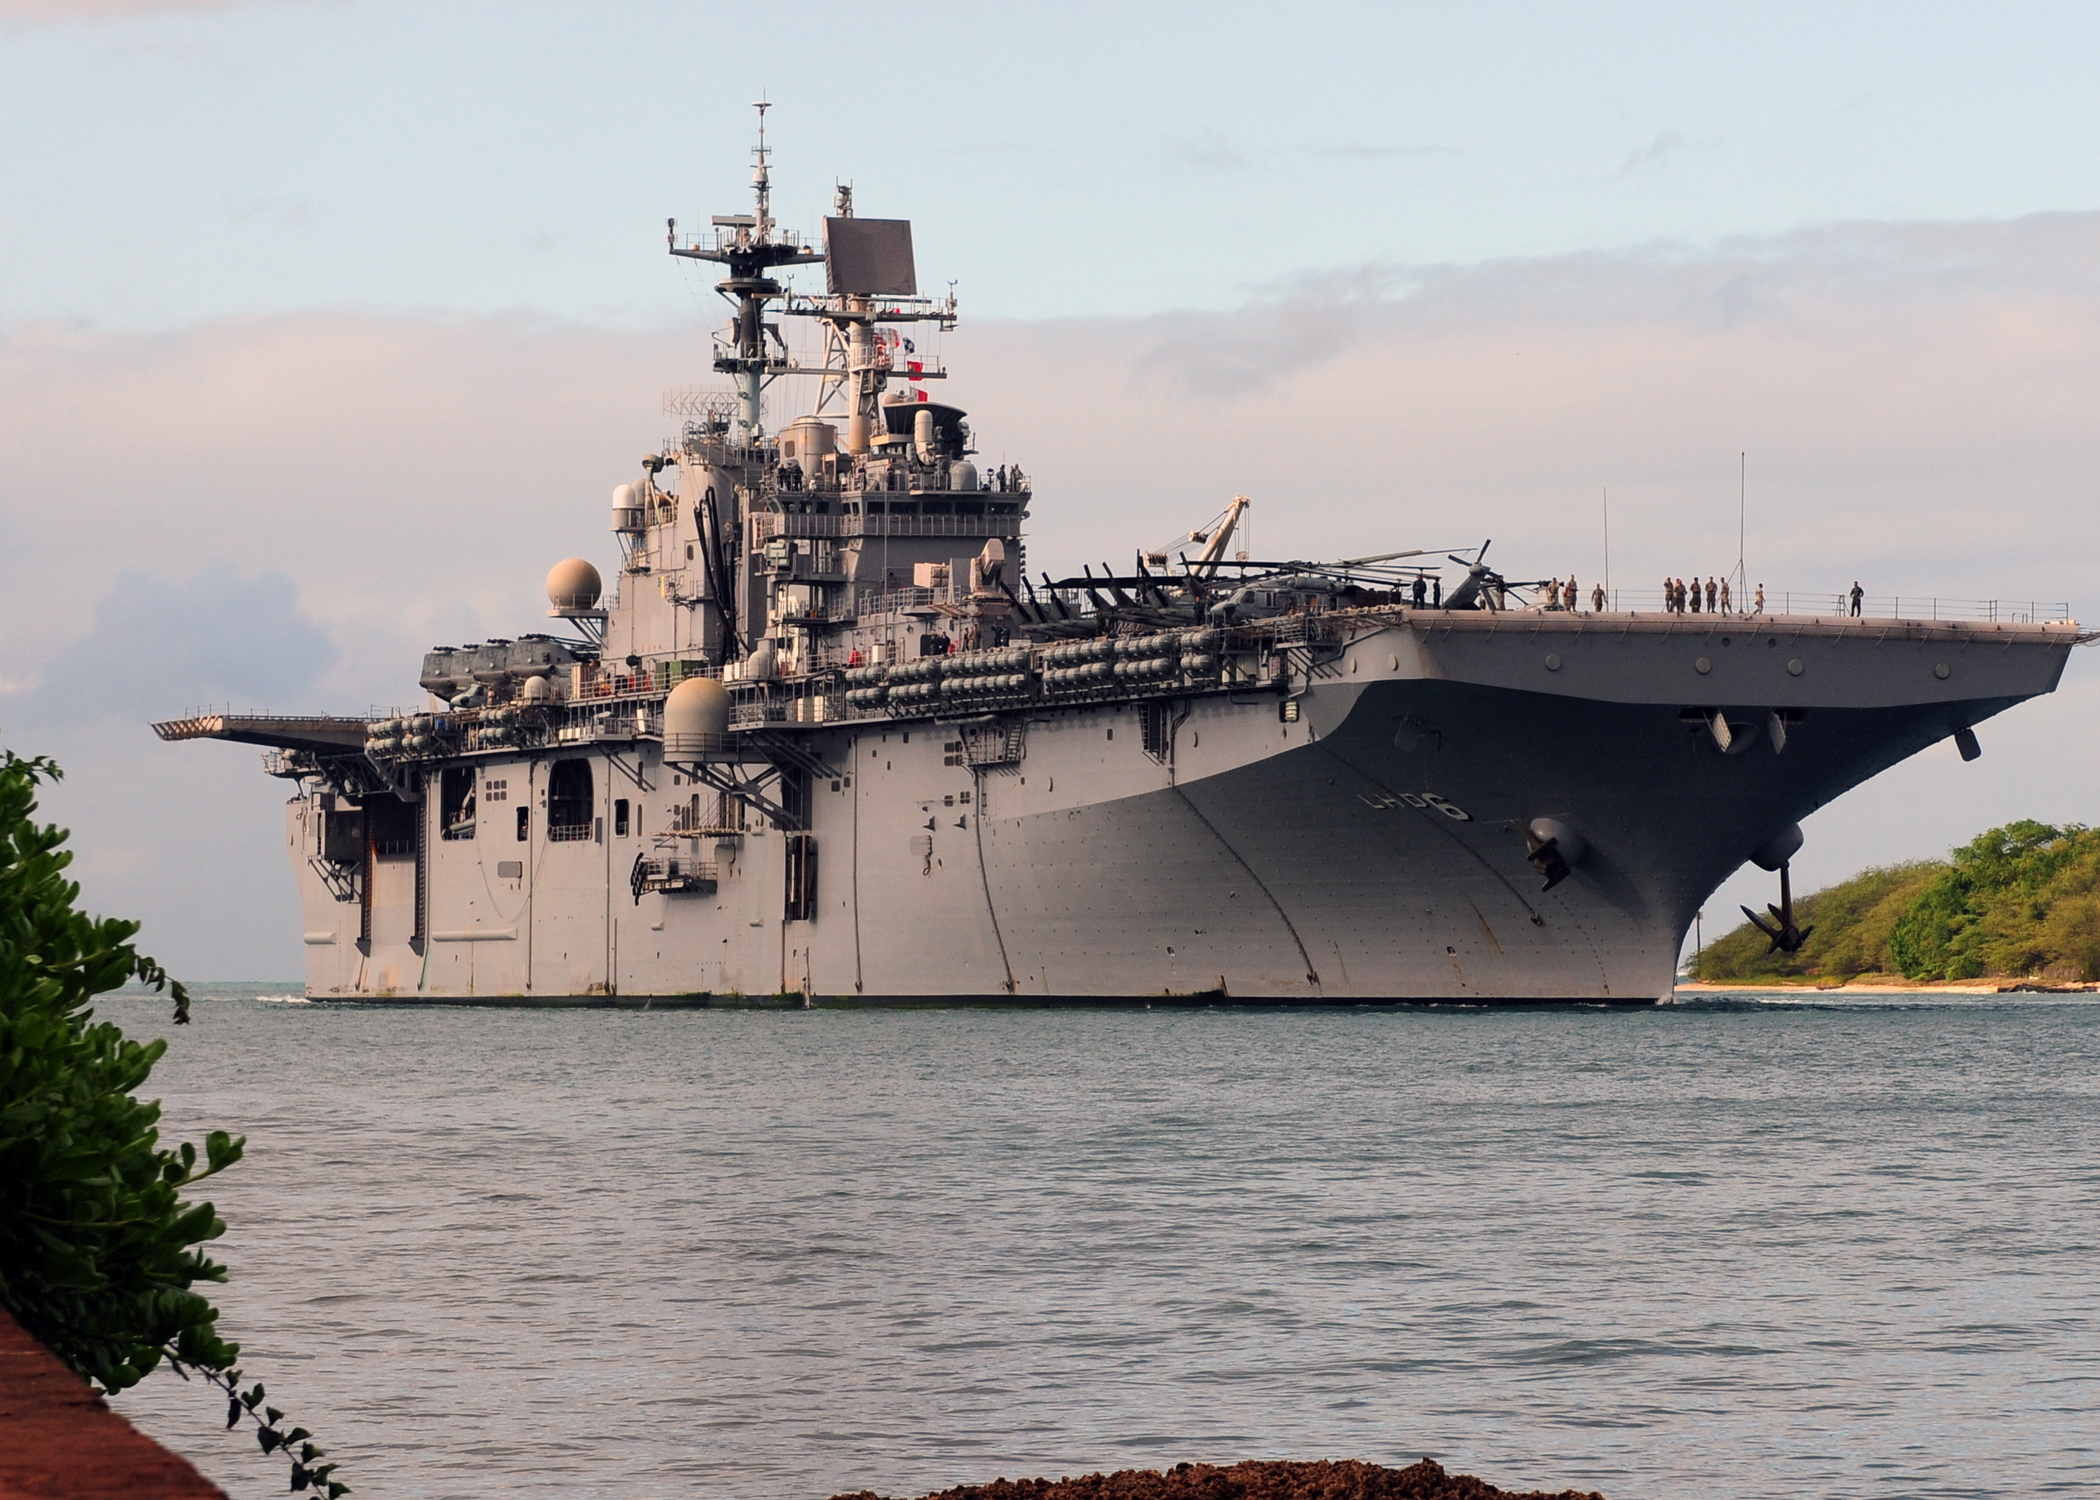 US_Navy_100731-N-6854D-067_The_Wasp-class_amphibious_assault_ship_USS_Bonhomme_Richard_%28LHD_6%29_returns_to_Joint_Base_Pearl_Harbor-Hickam_after_participating_in_Rim_of_the_Pacific_%28RIMPAC%29_2010_exercises.jpg